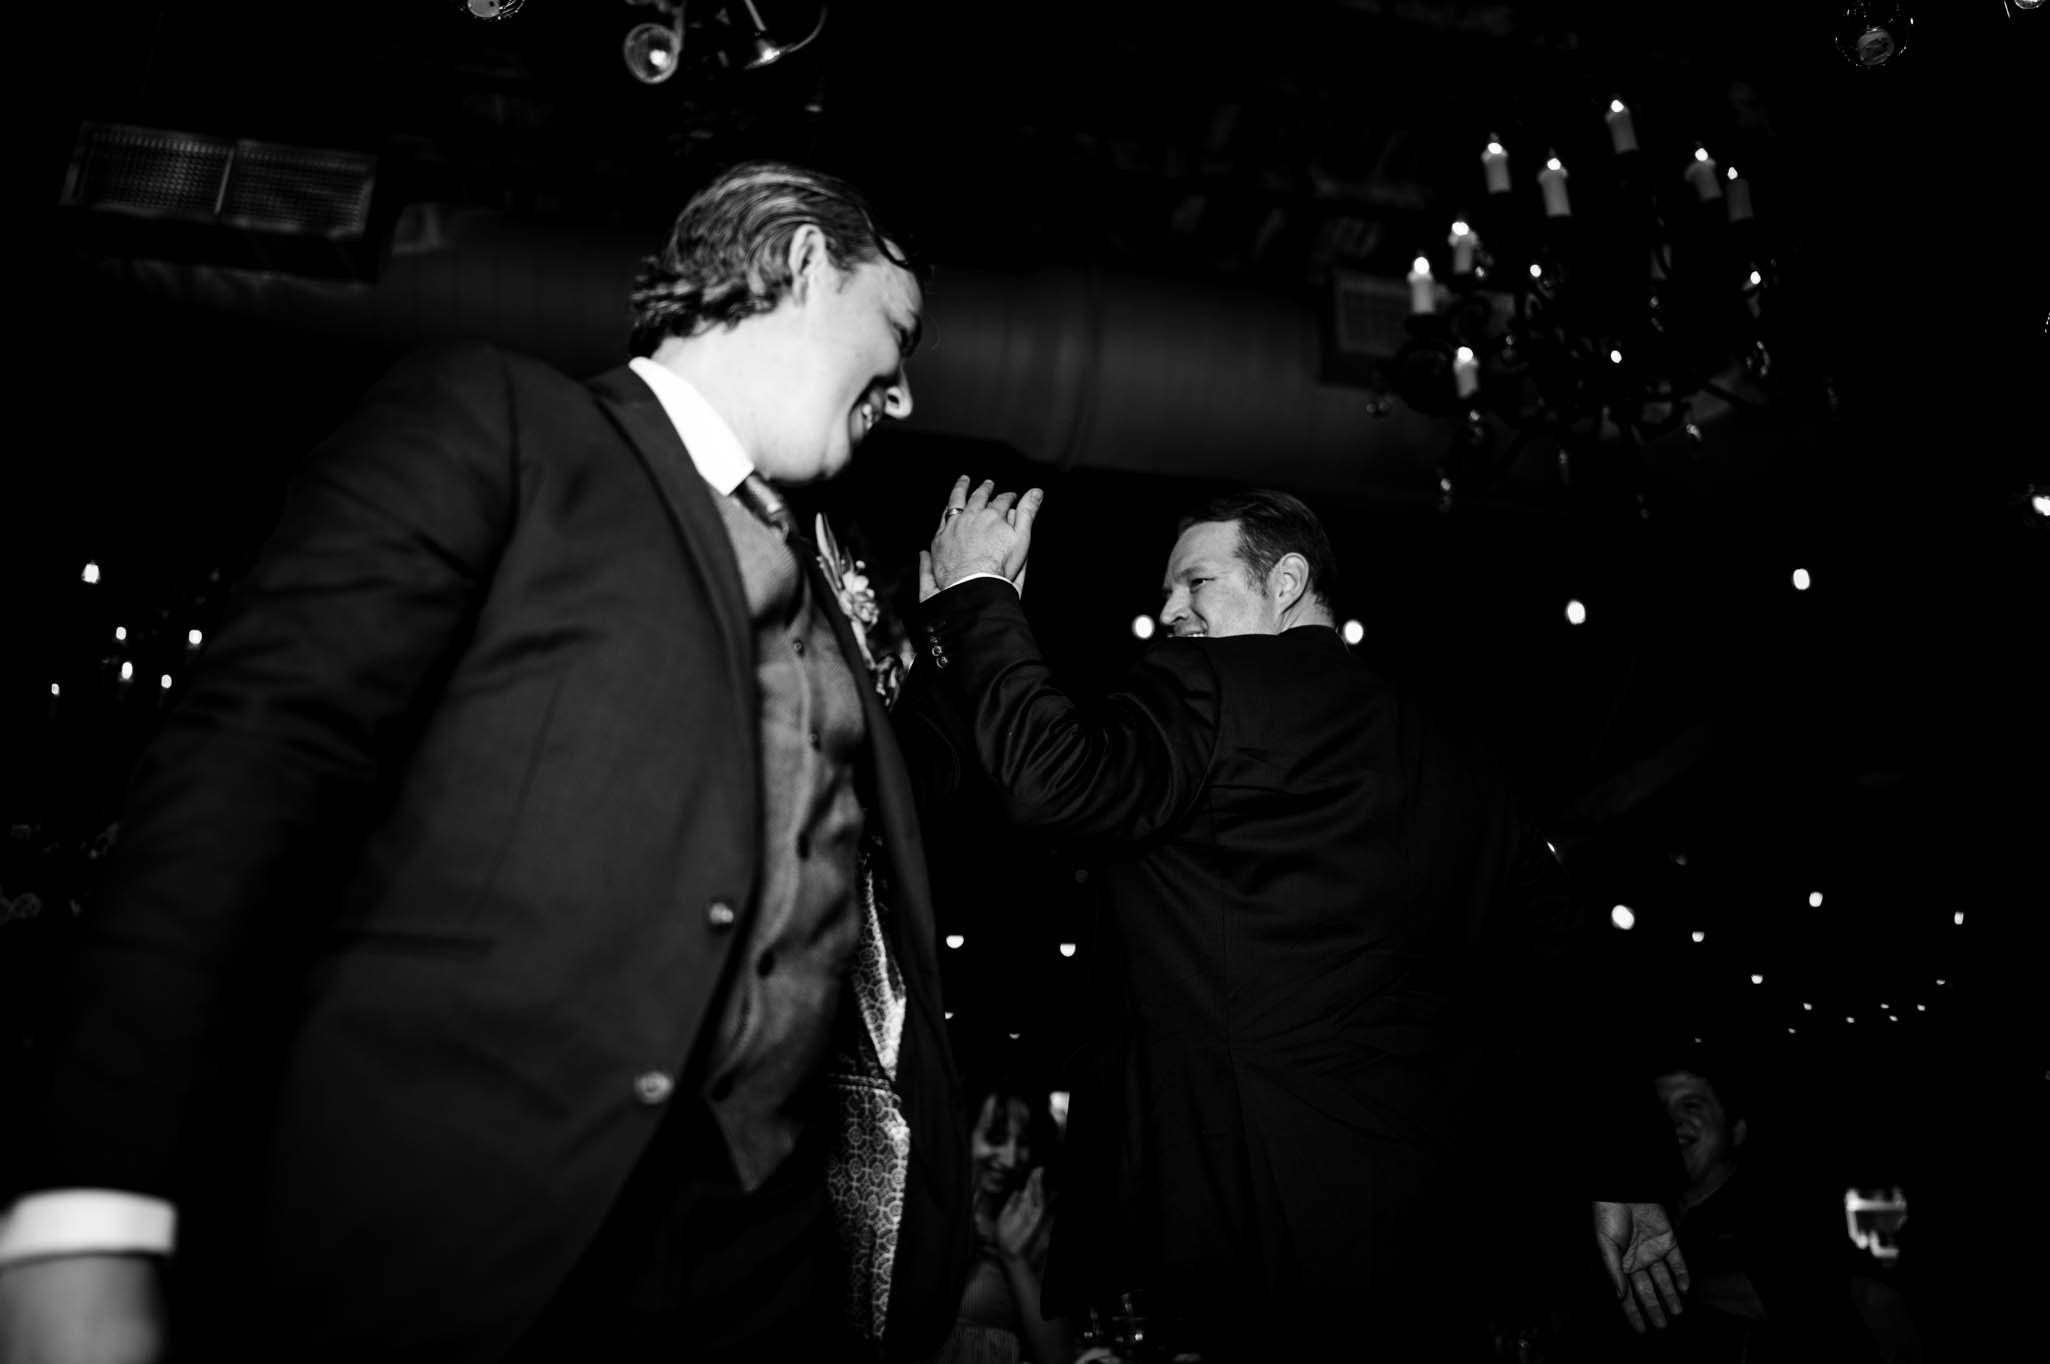 two grooms dancing during their wedding reception